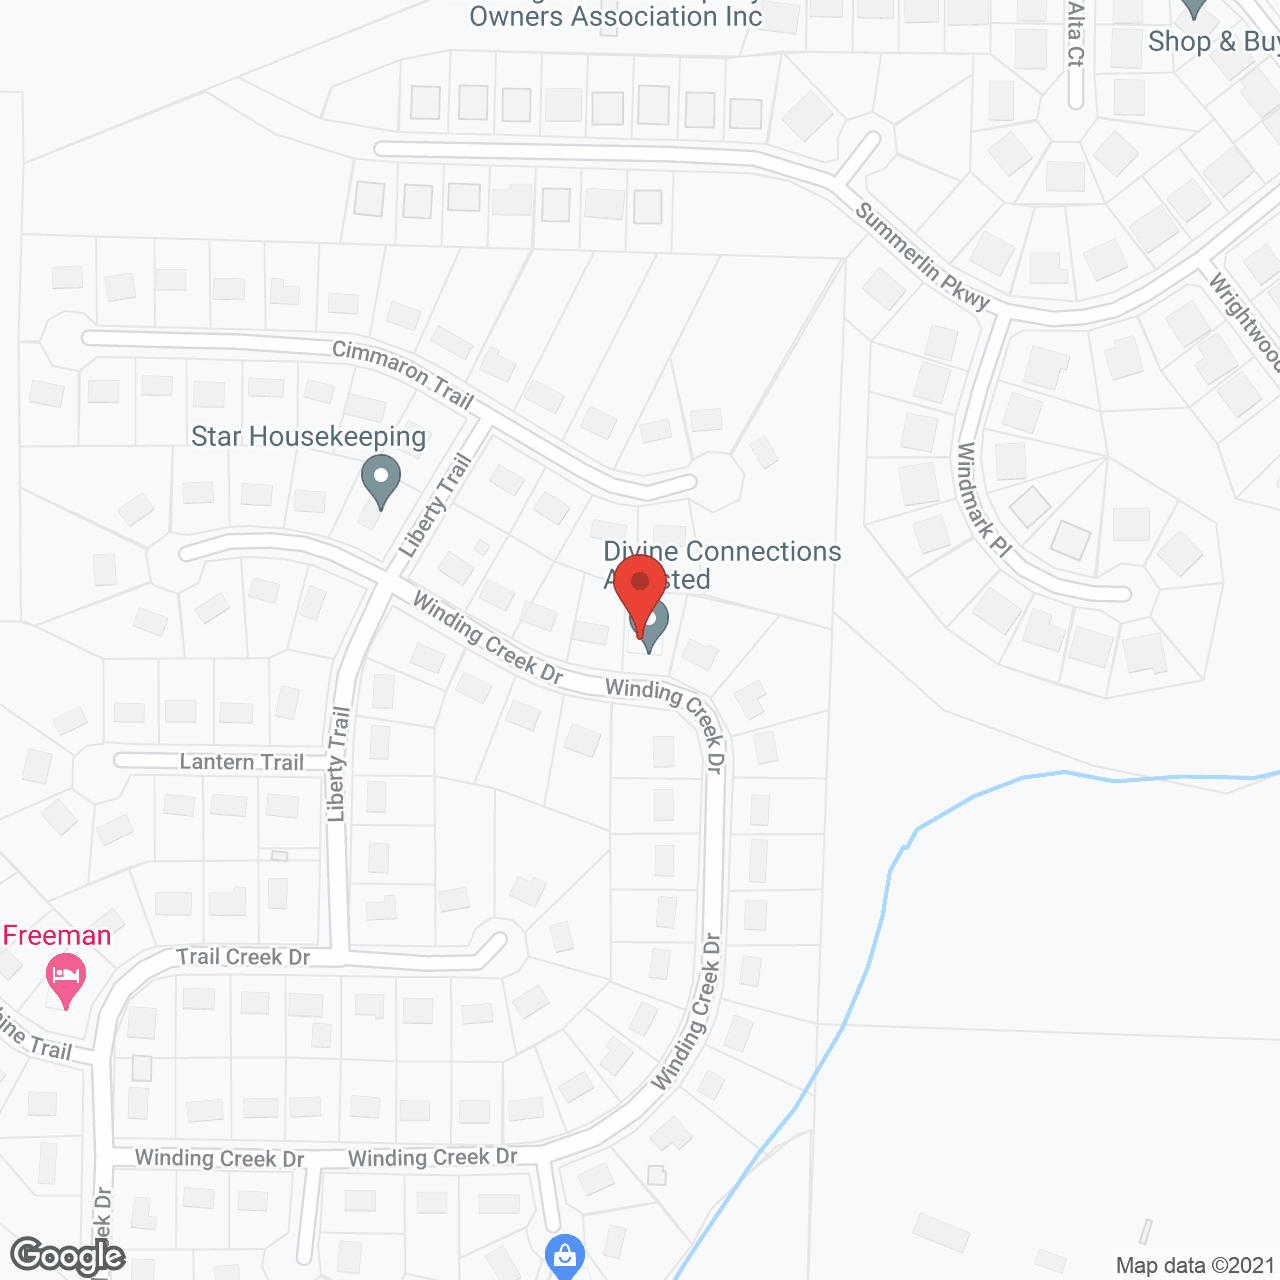 Divine Connections in google map